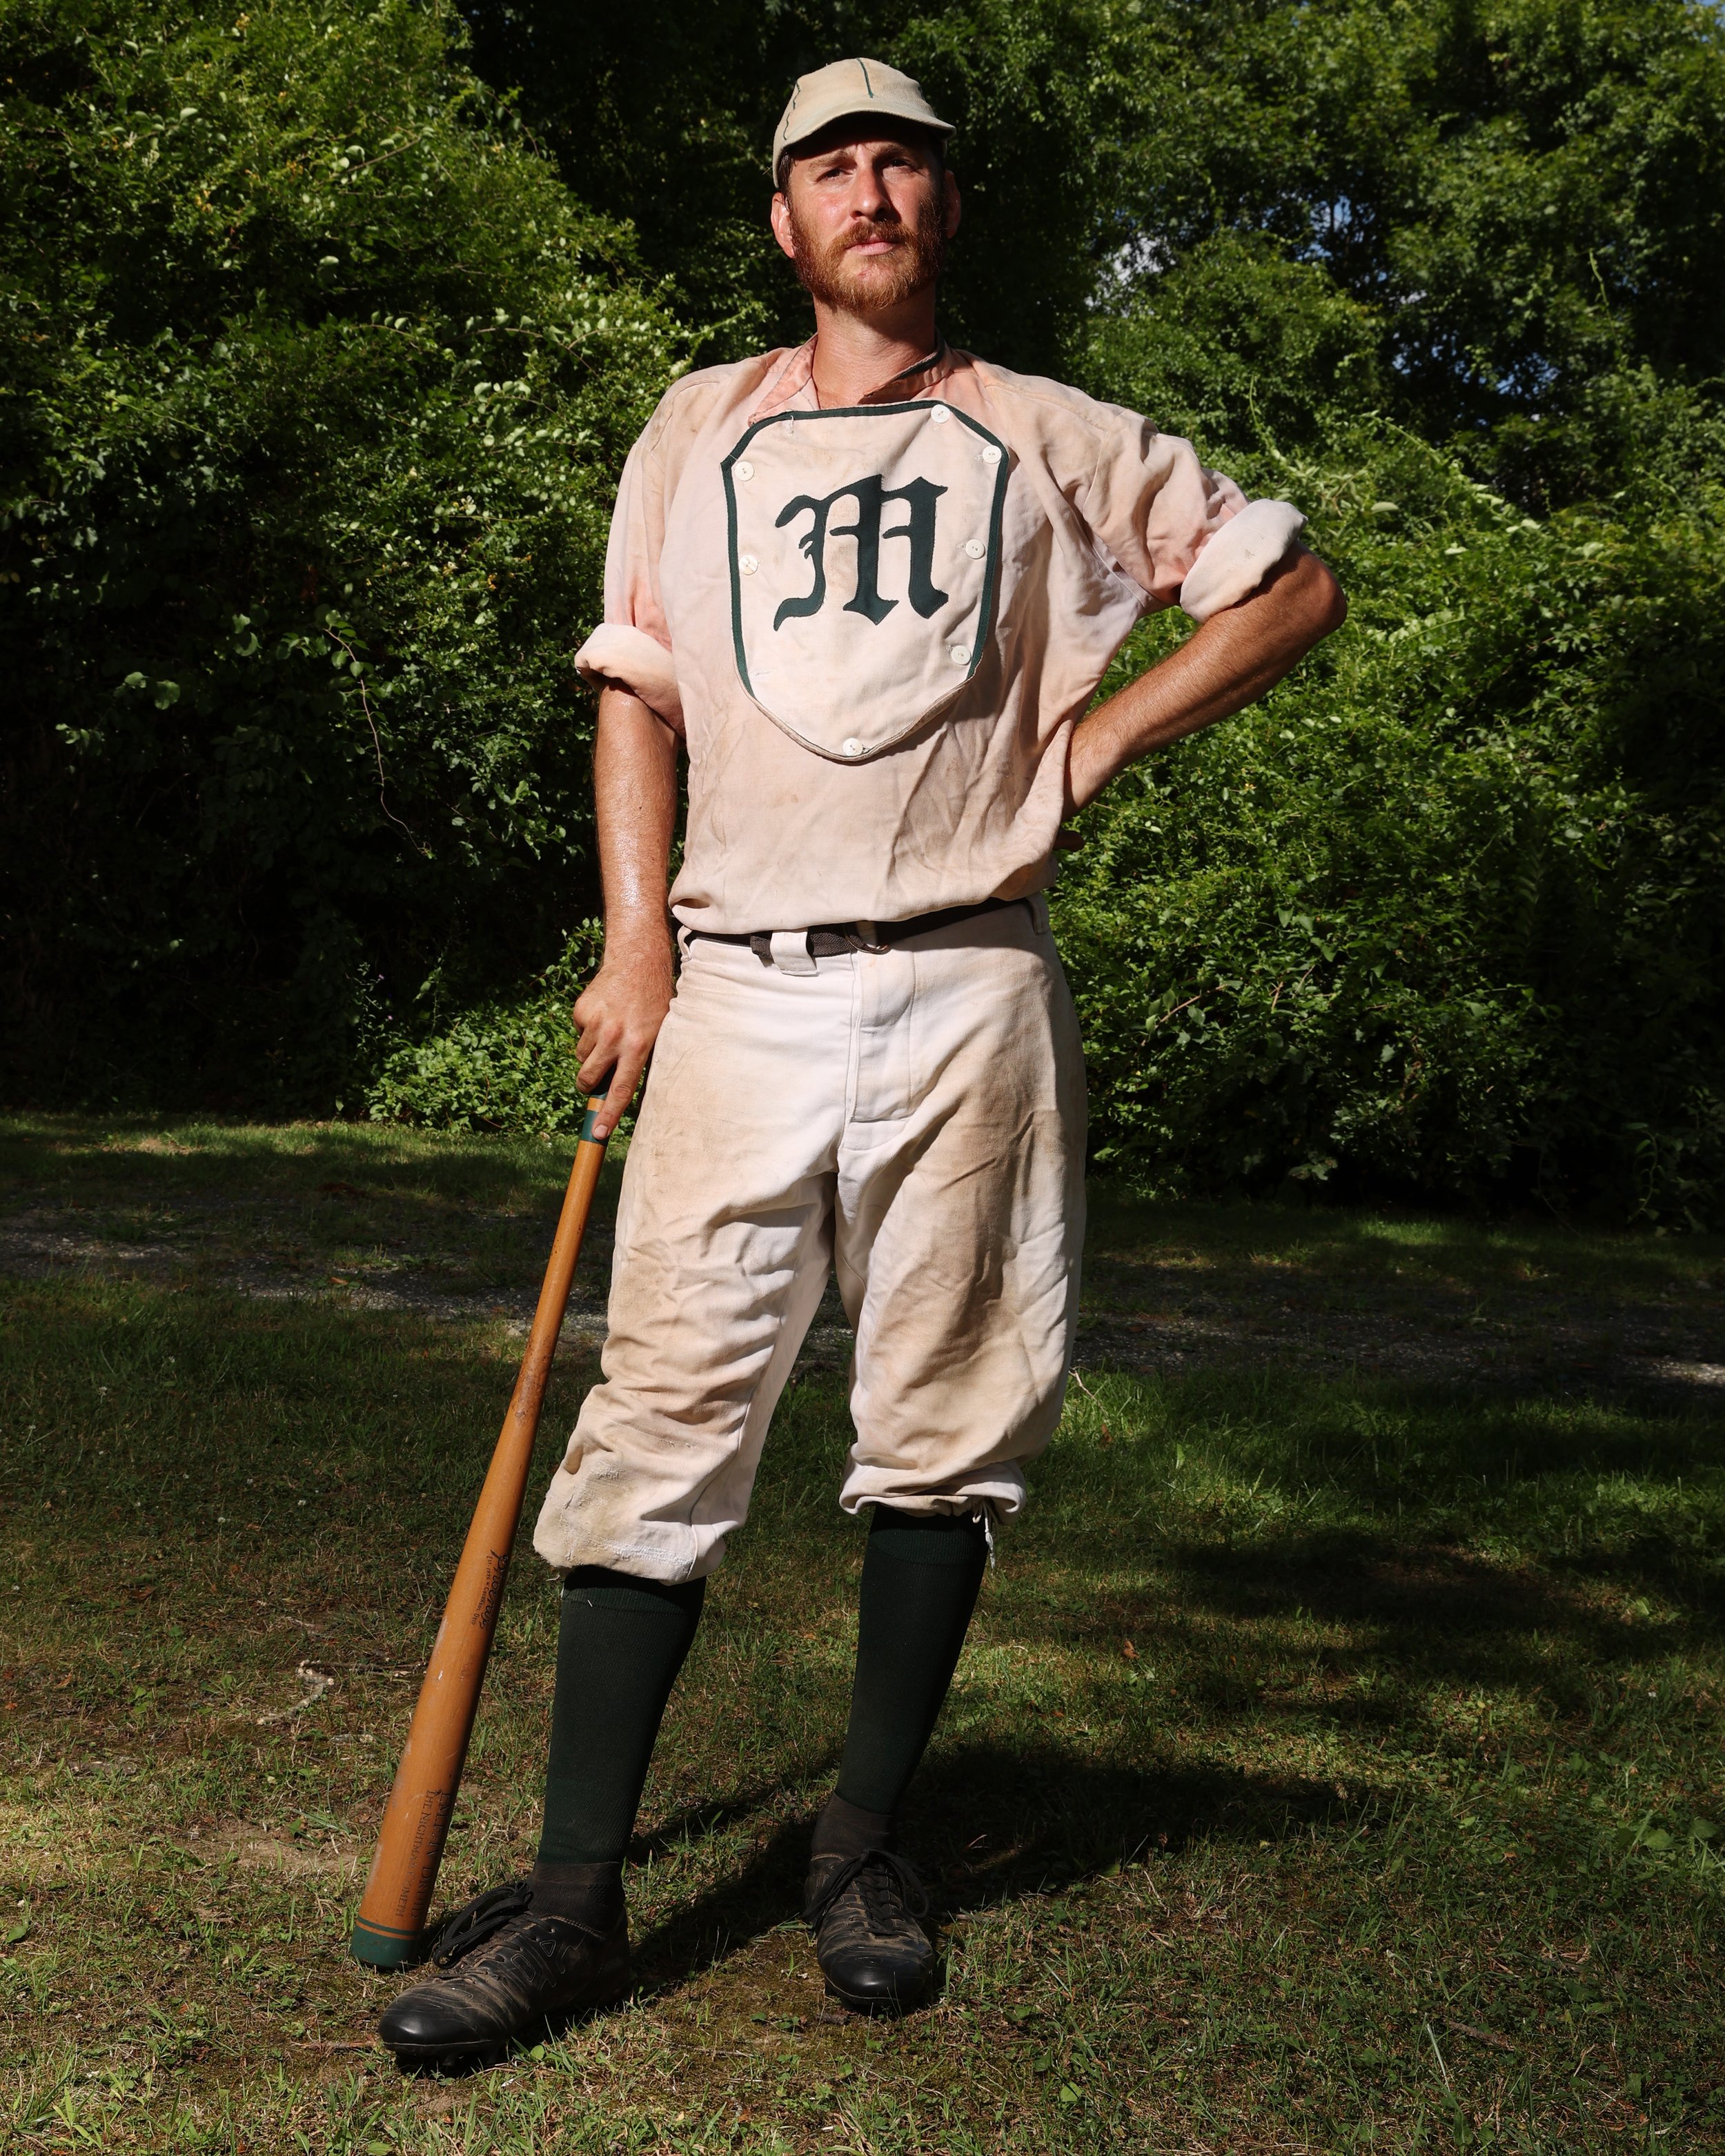  Frank "Druid" Pagano of the New York Mutuals poses for a portrait during the 25th Annual Doc Adams Old Time Base Ball Festival at Old Bethpage Village Restoration on August 07, 2022 in Old Bethpage, New York.  